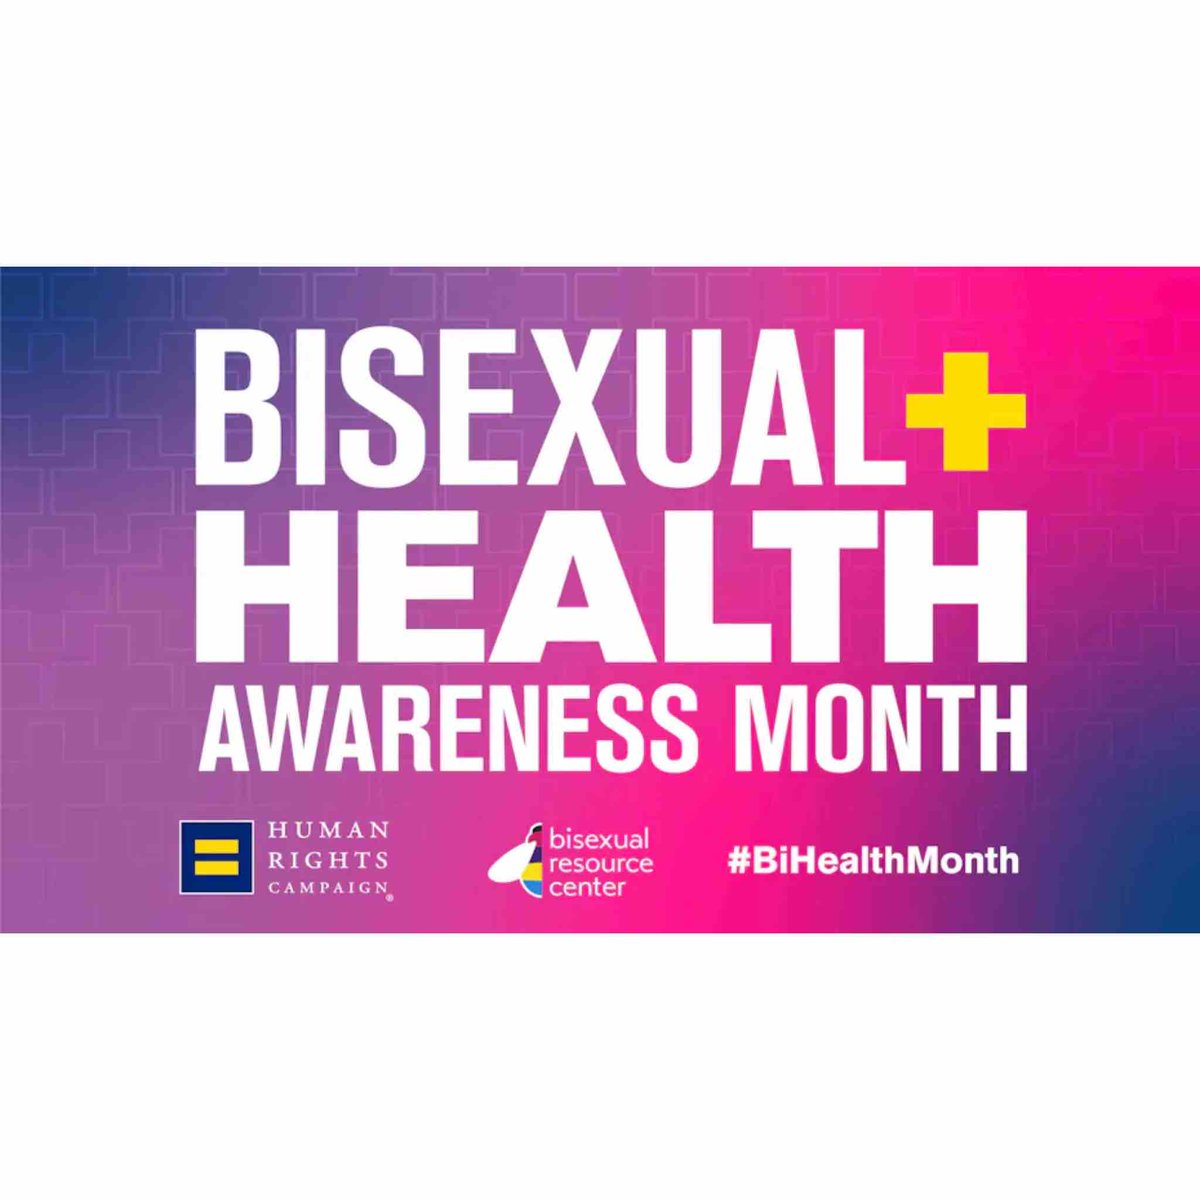 This month is Bisexual+ Health Awareness Month.

This year’s theme of “Equity” further highlights the importance of looking at our work with careful attention to the intersectional disparities that impact the most vulnerable among us.

#BiHealthMonth #BiSexual #truthprojecthtx